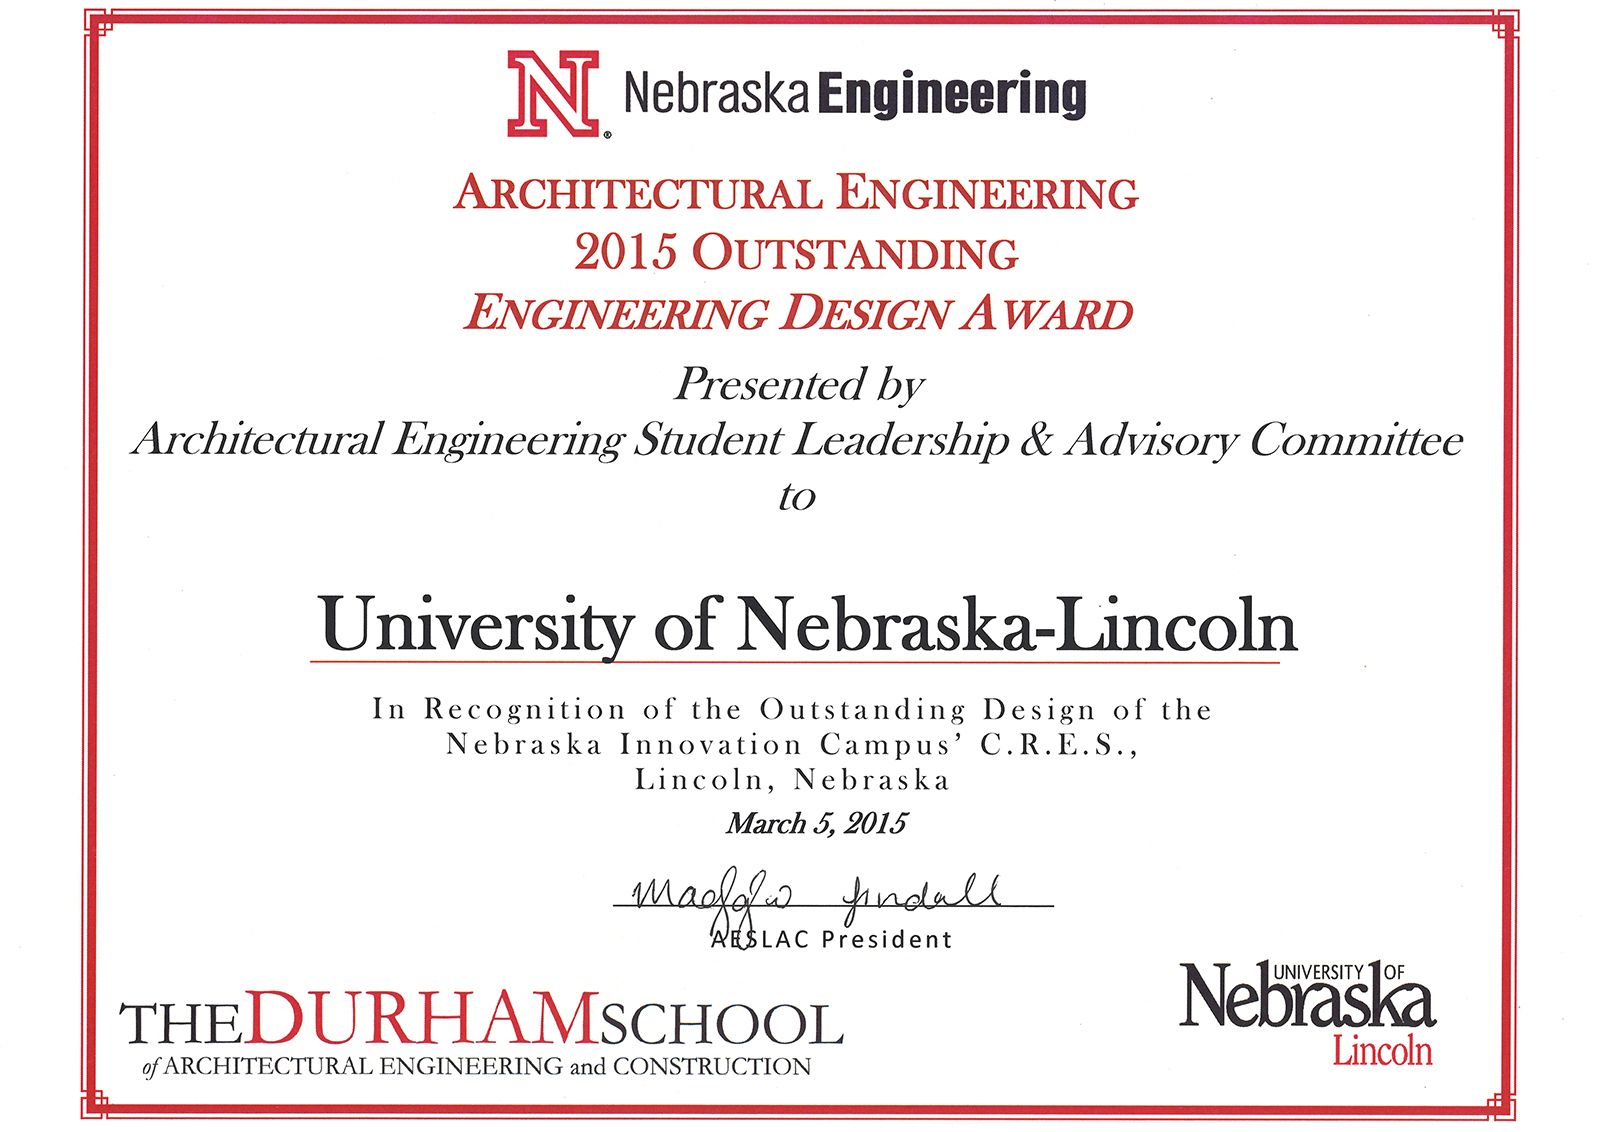 The Architectural Engineering 2015 Outstanding Engineering Design Award